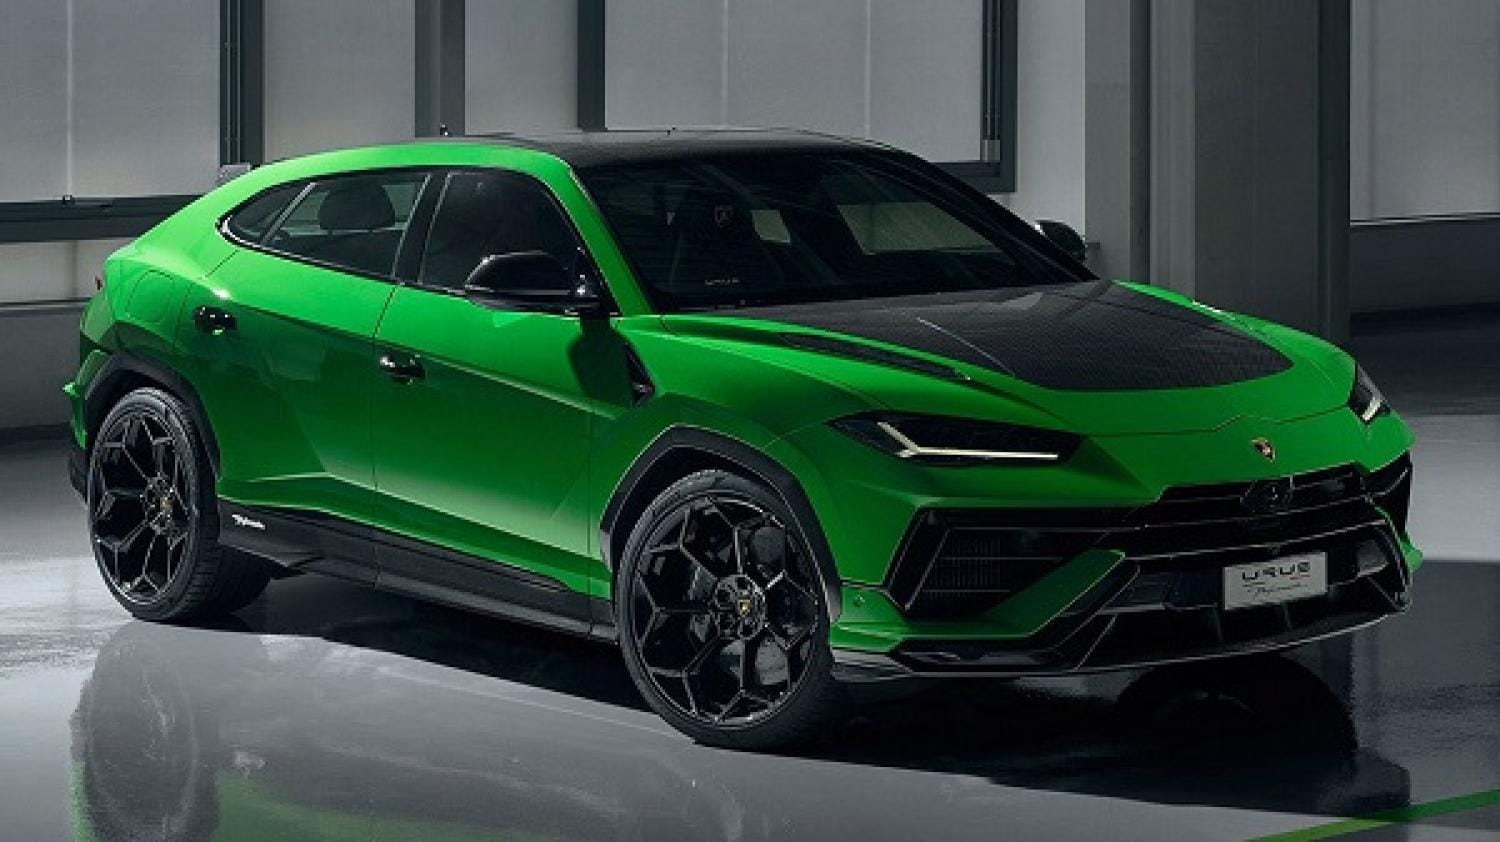 The Raging Bull Reigns Supreme: Picking the Best Lamborghini of 2023